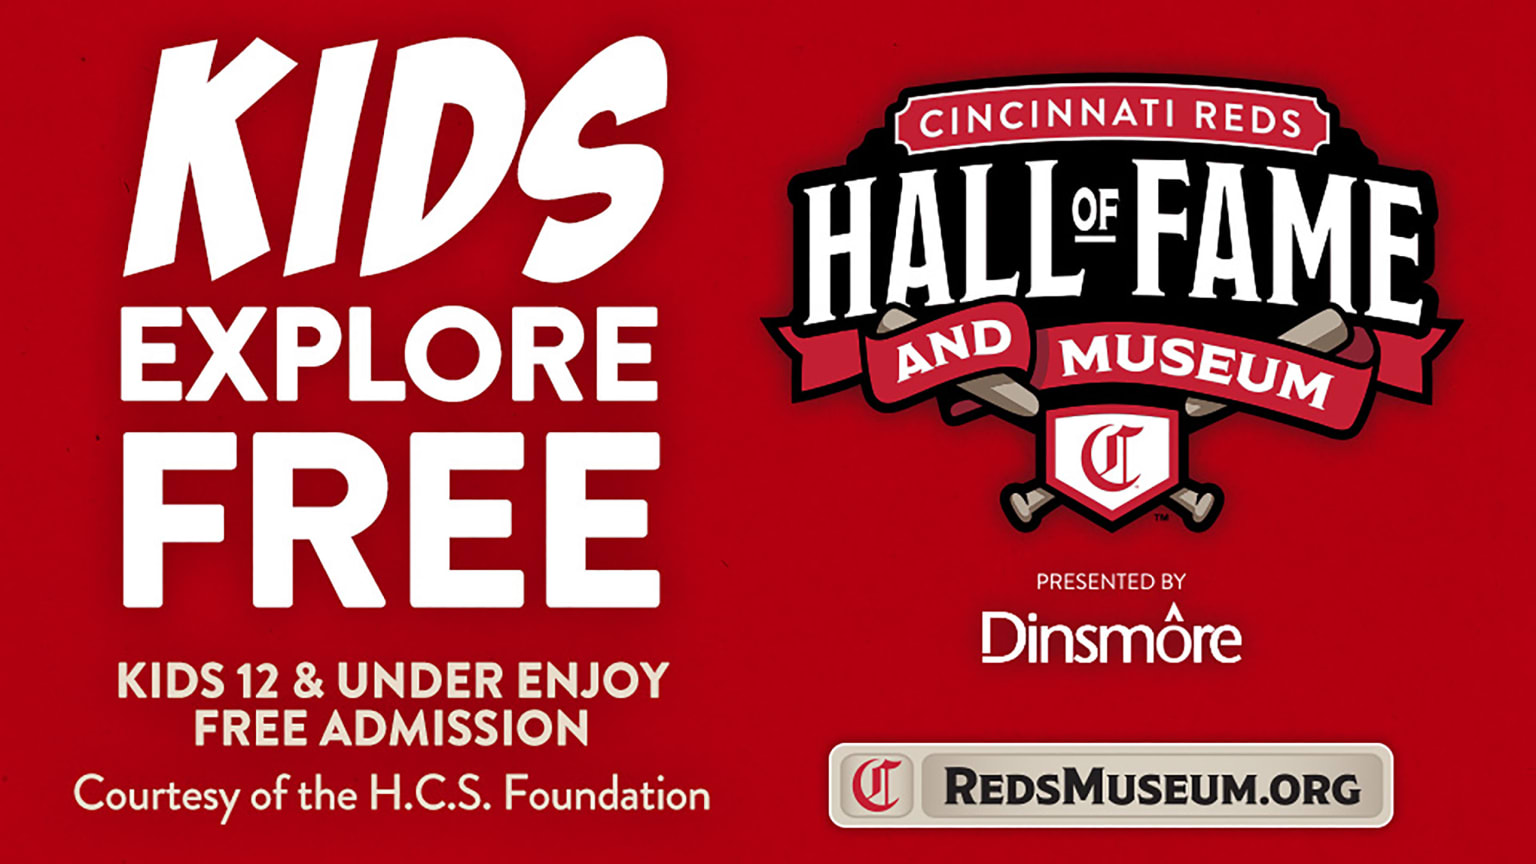 Cincinnati Reds - Join us in wishing a happy birthday to Reds Hall